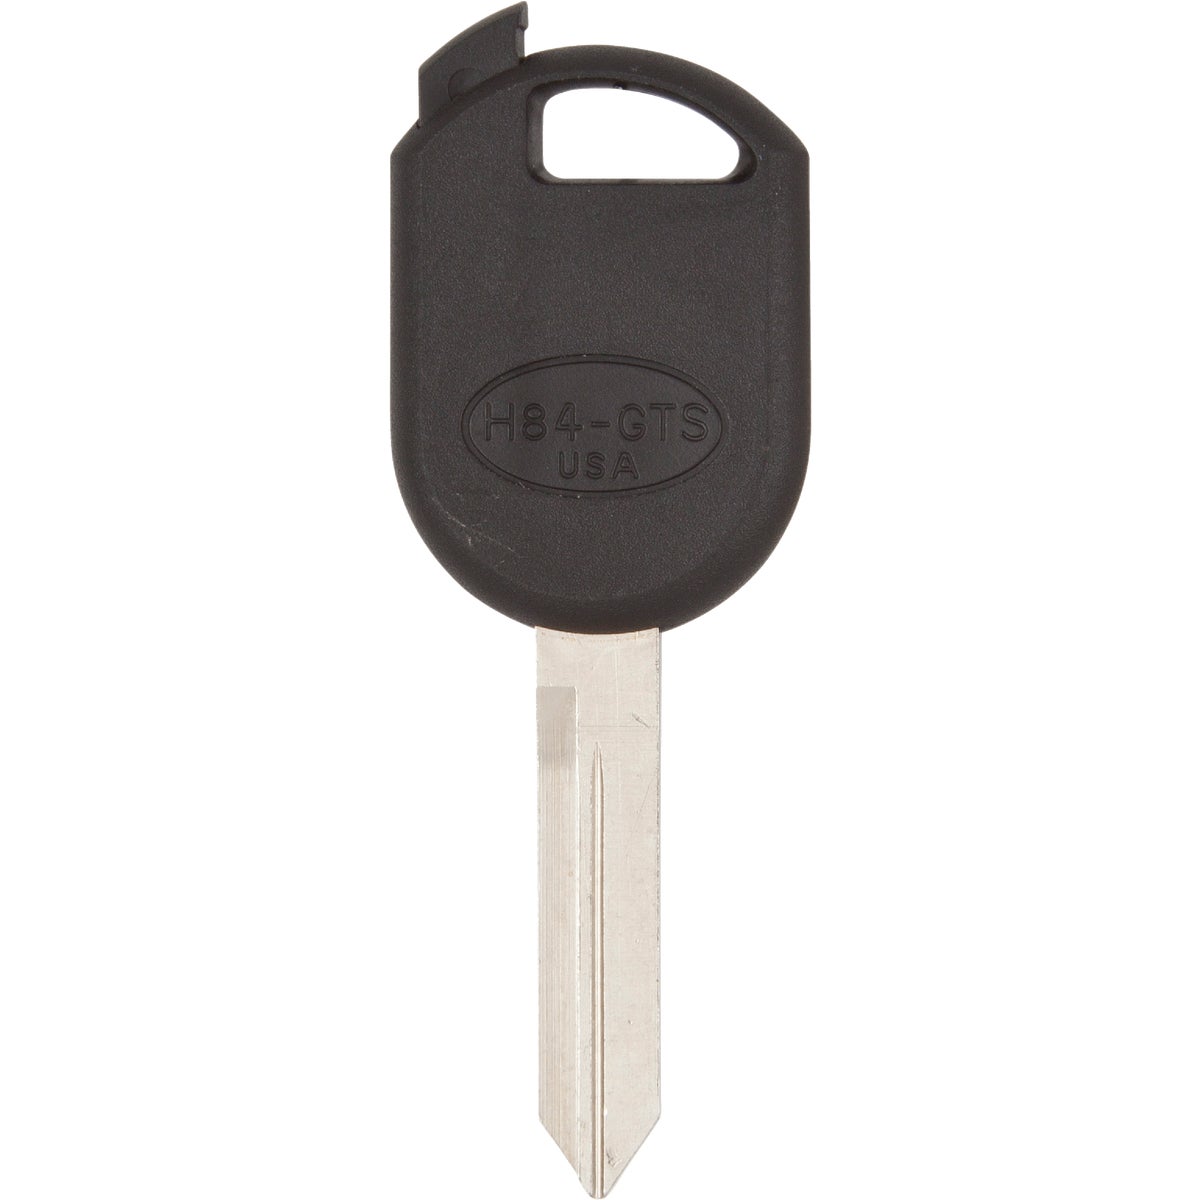 ILCO Look Alike Key Shell For Ford / Lincoln / Mercury Models, H84-GTS